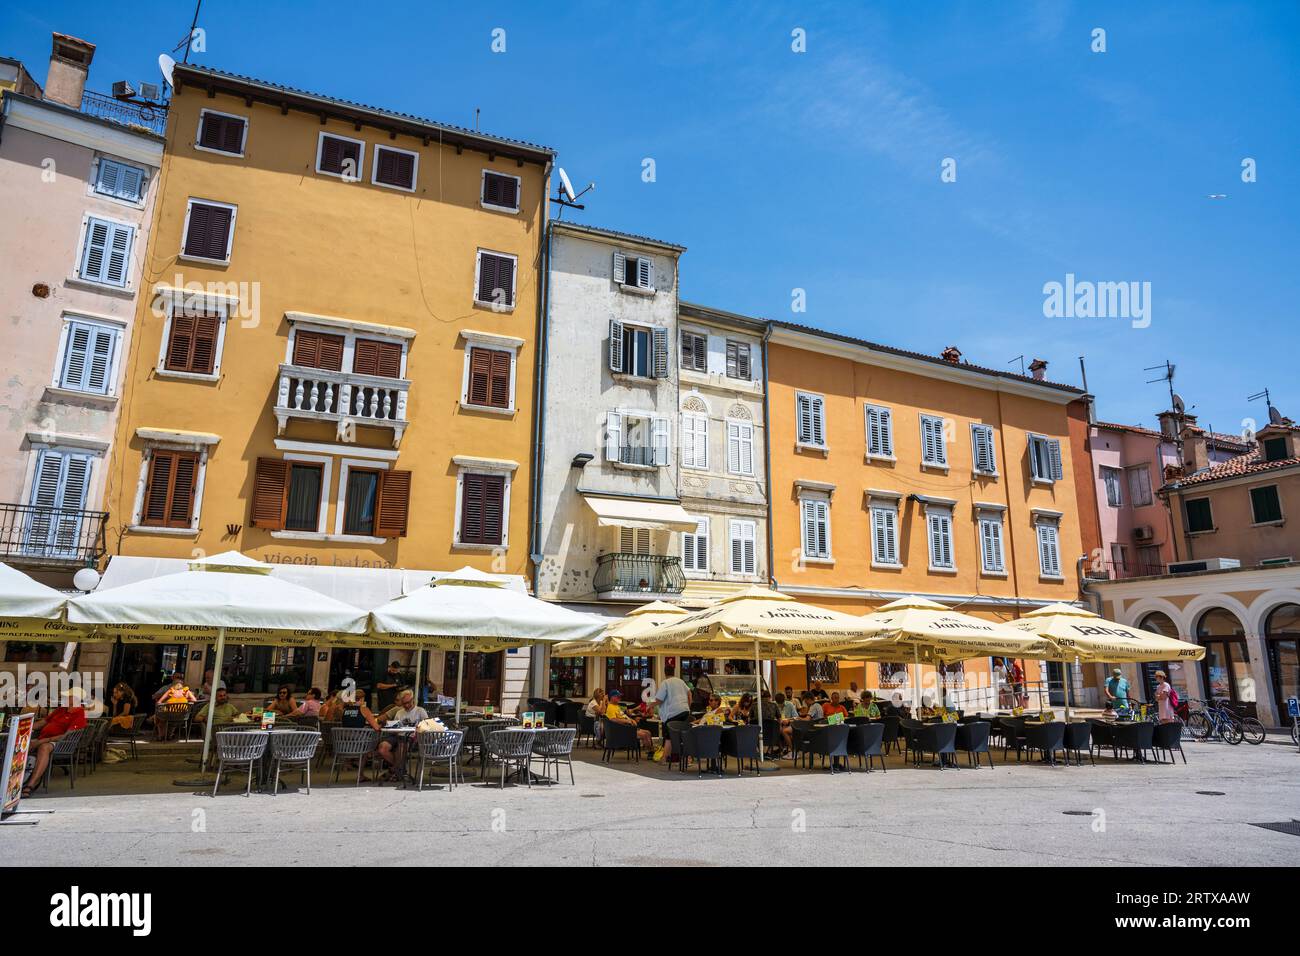 Outdoor cafes and restaurants on Marshal Tito Square in the old town of Rovinj on the Istrian Peninsula of Croatia Stock Photo